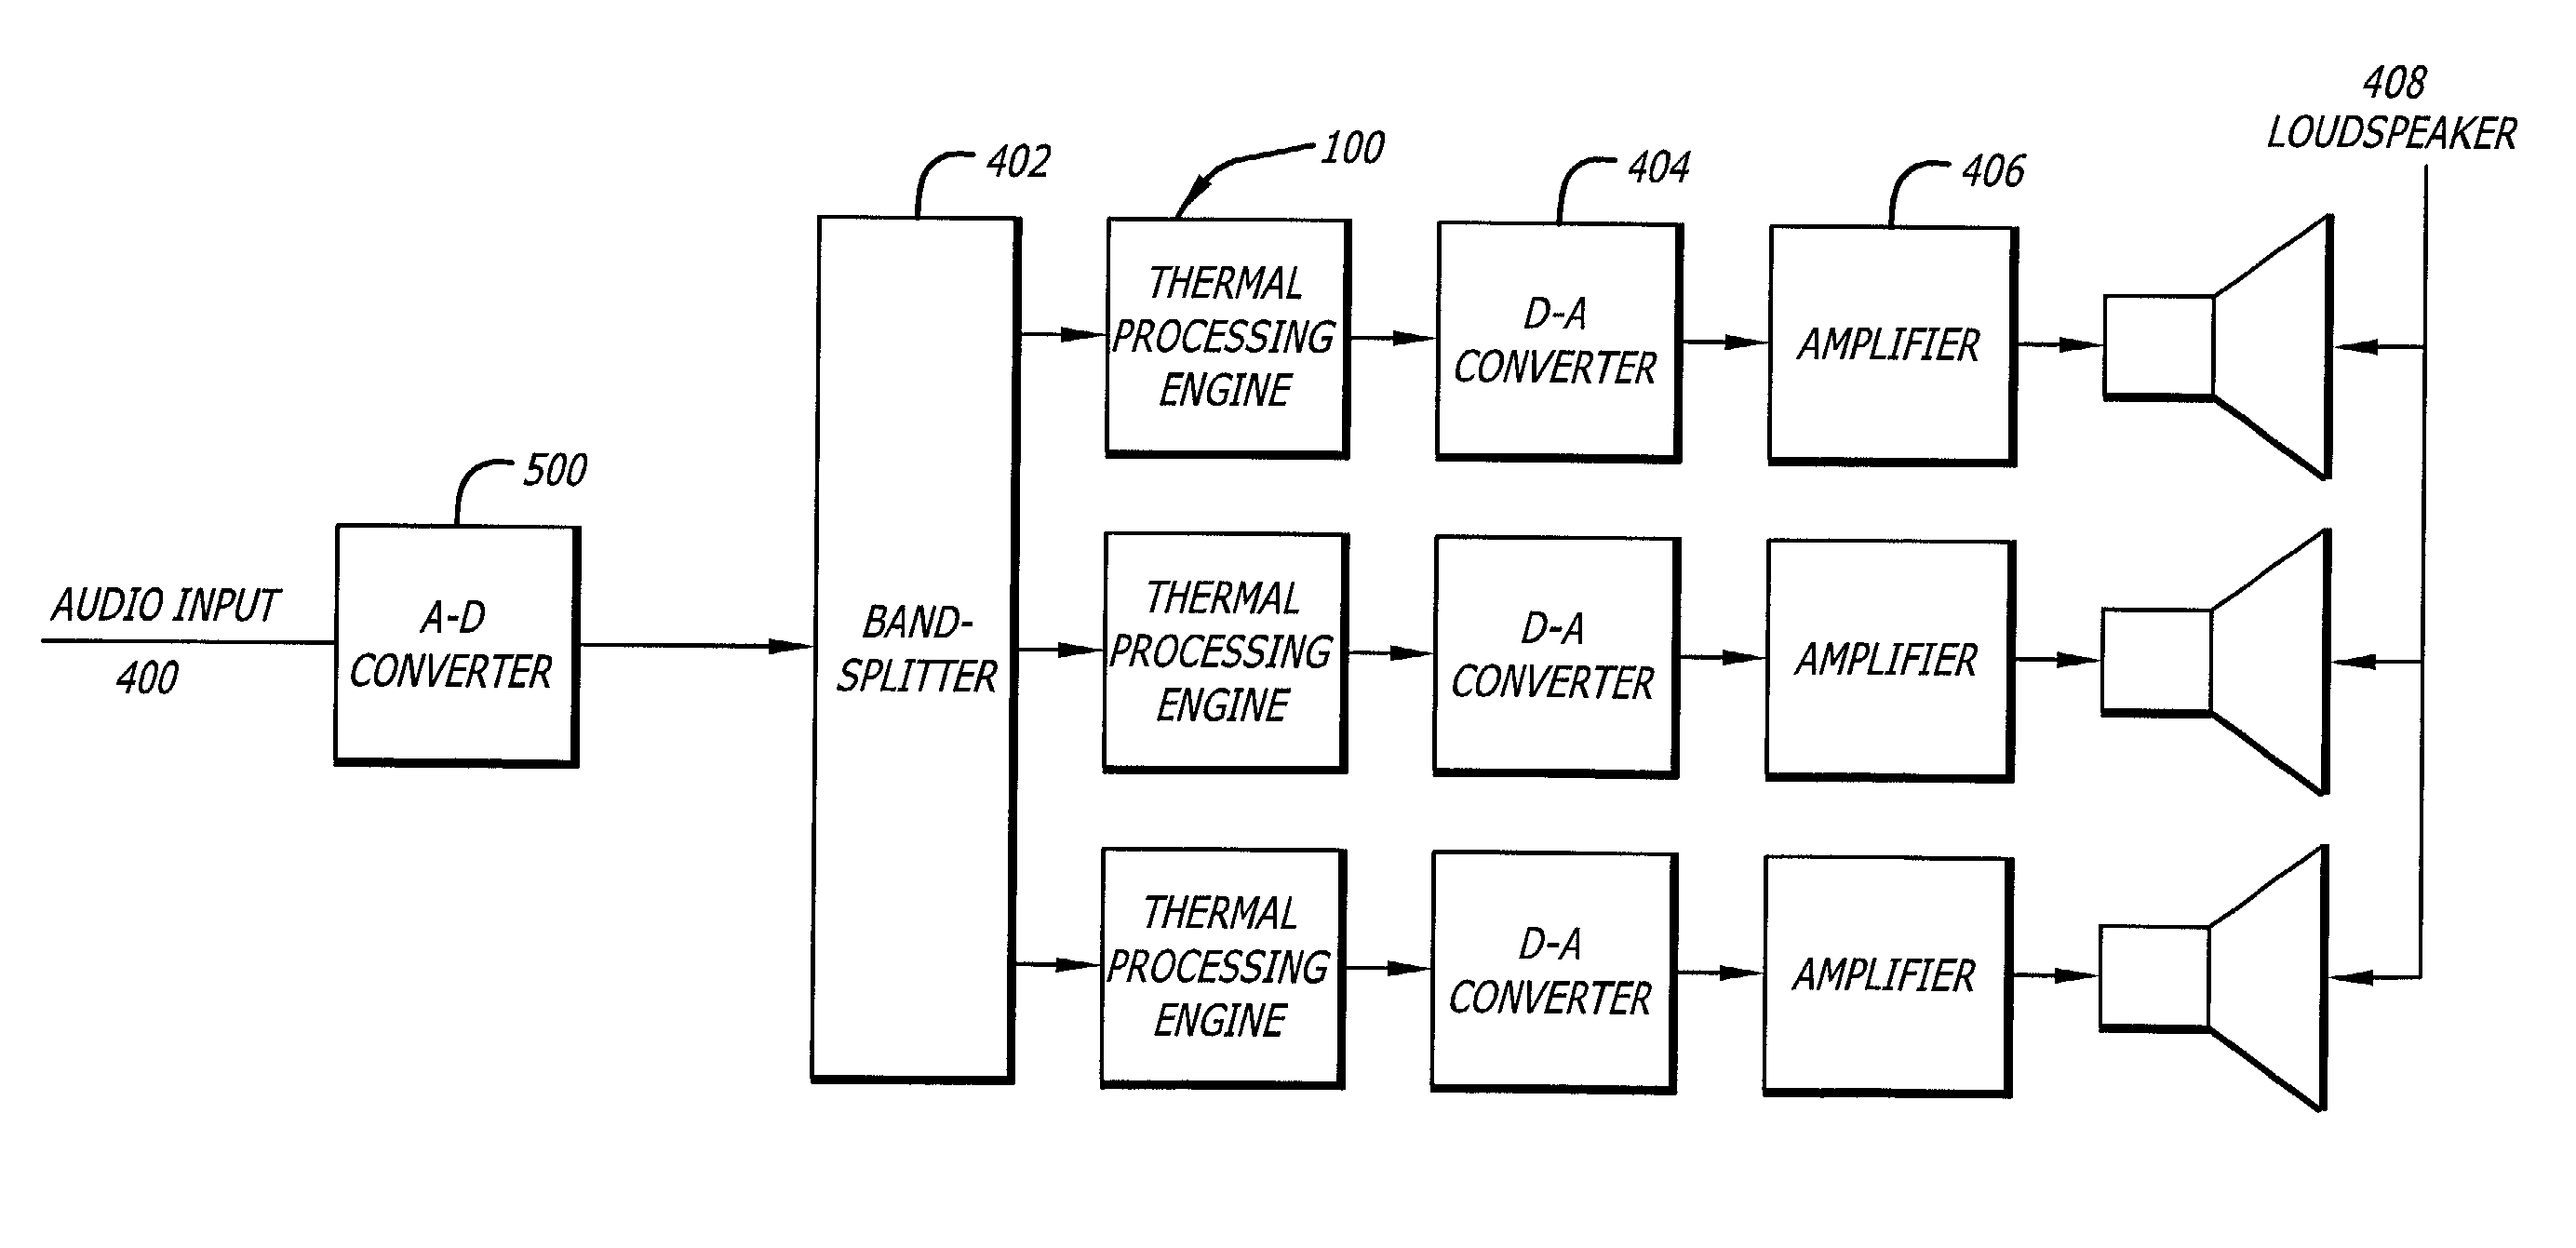 System for using digital signal processing to compensate for power compression of loudspeakers